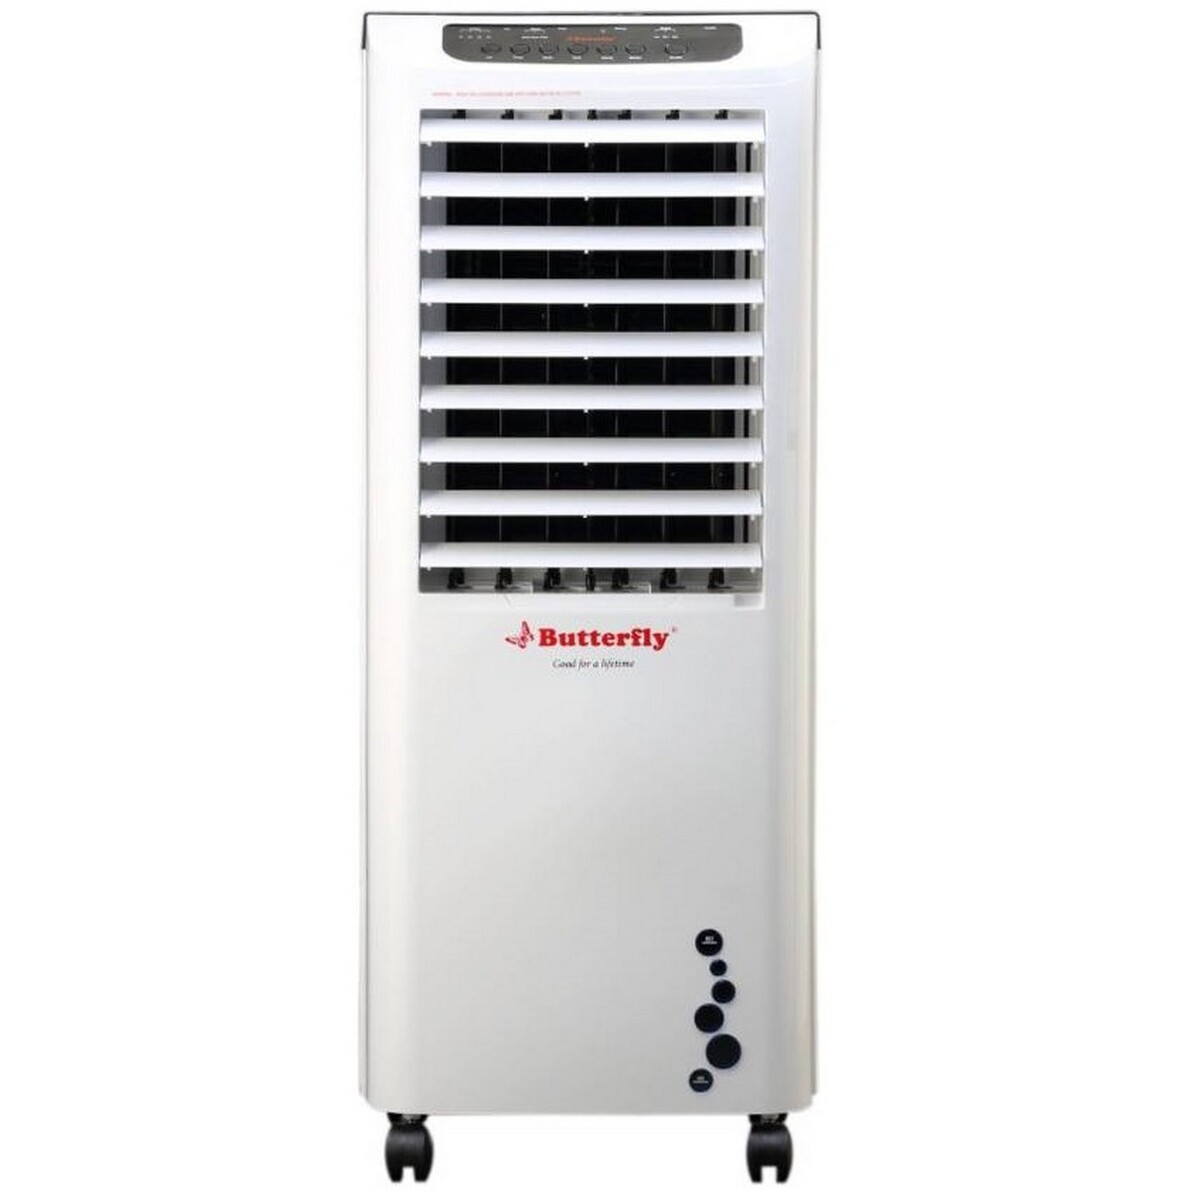 Butterfly Air Cooler Eco Smart 25ltr